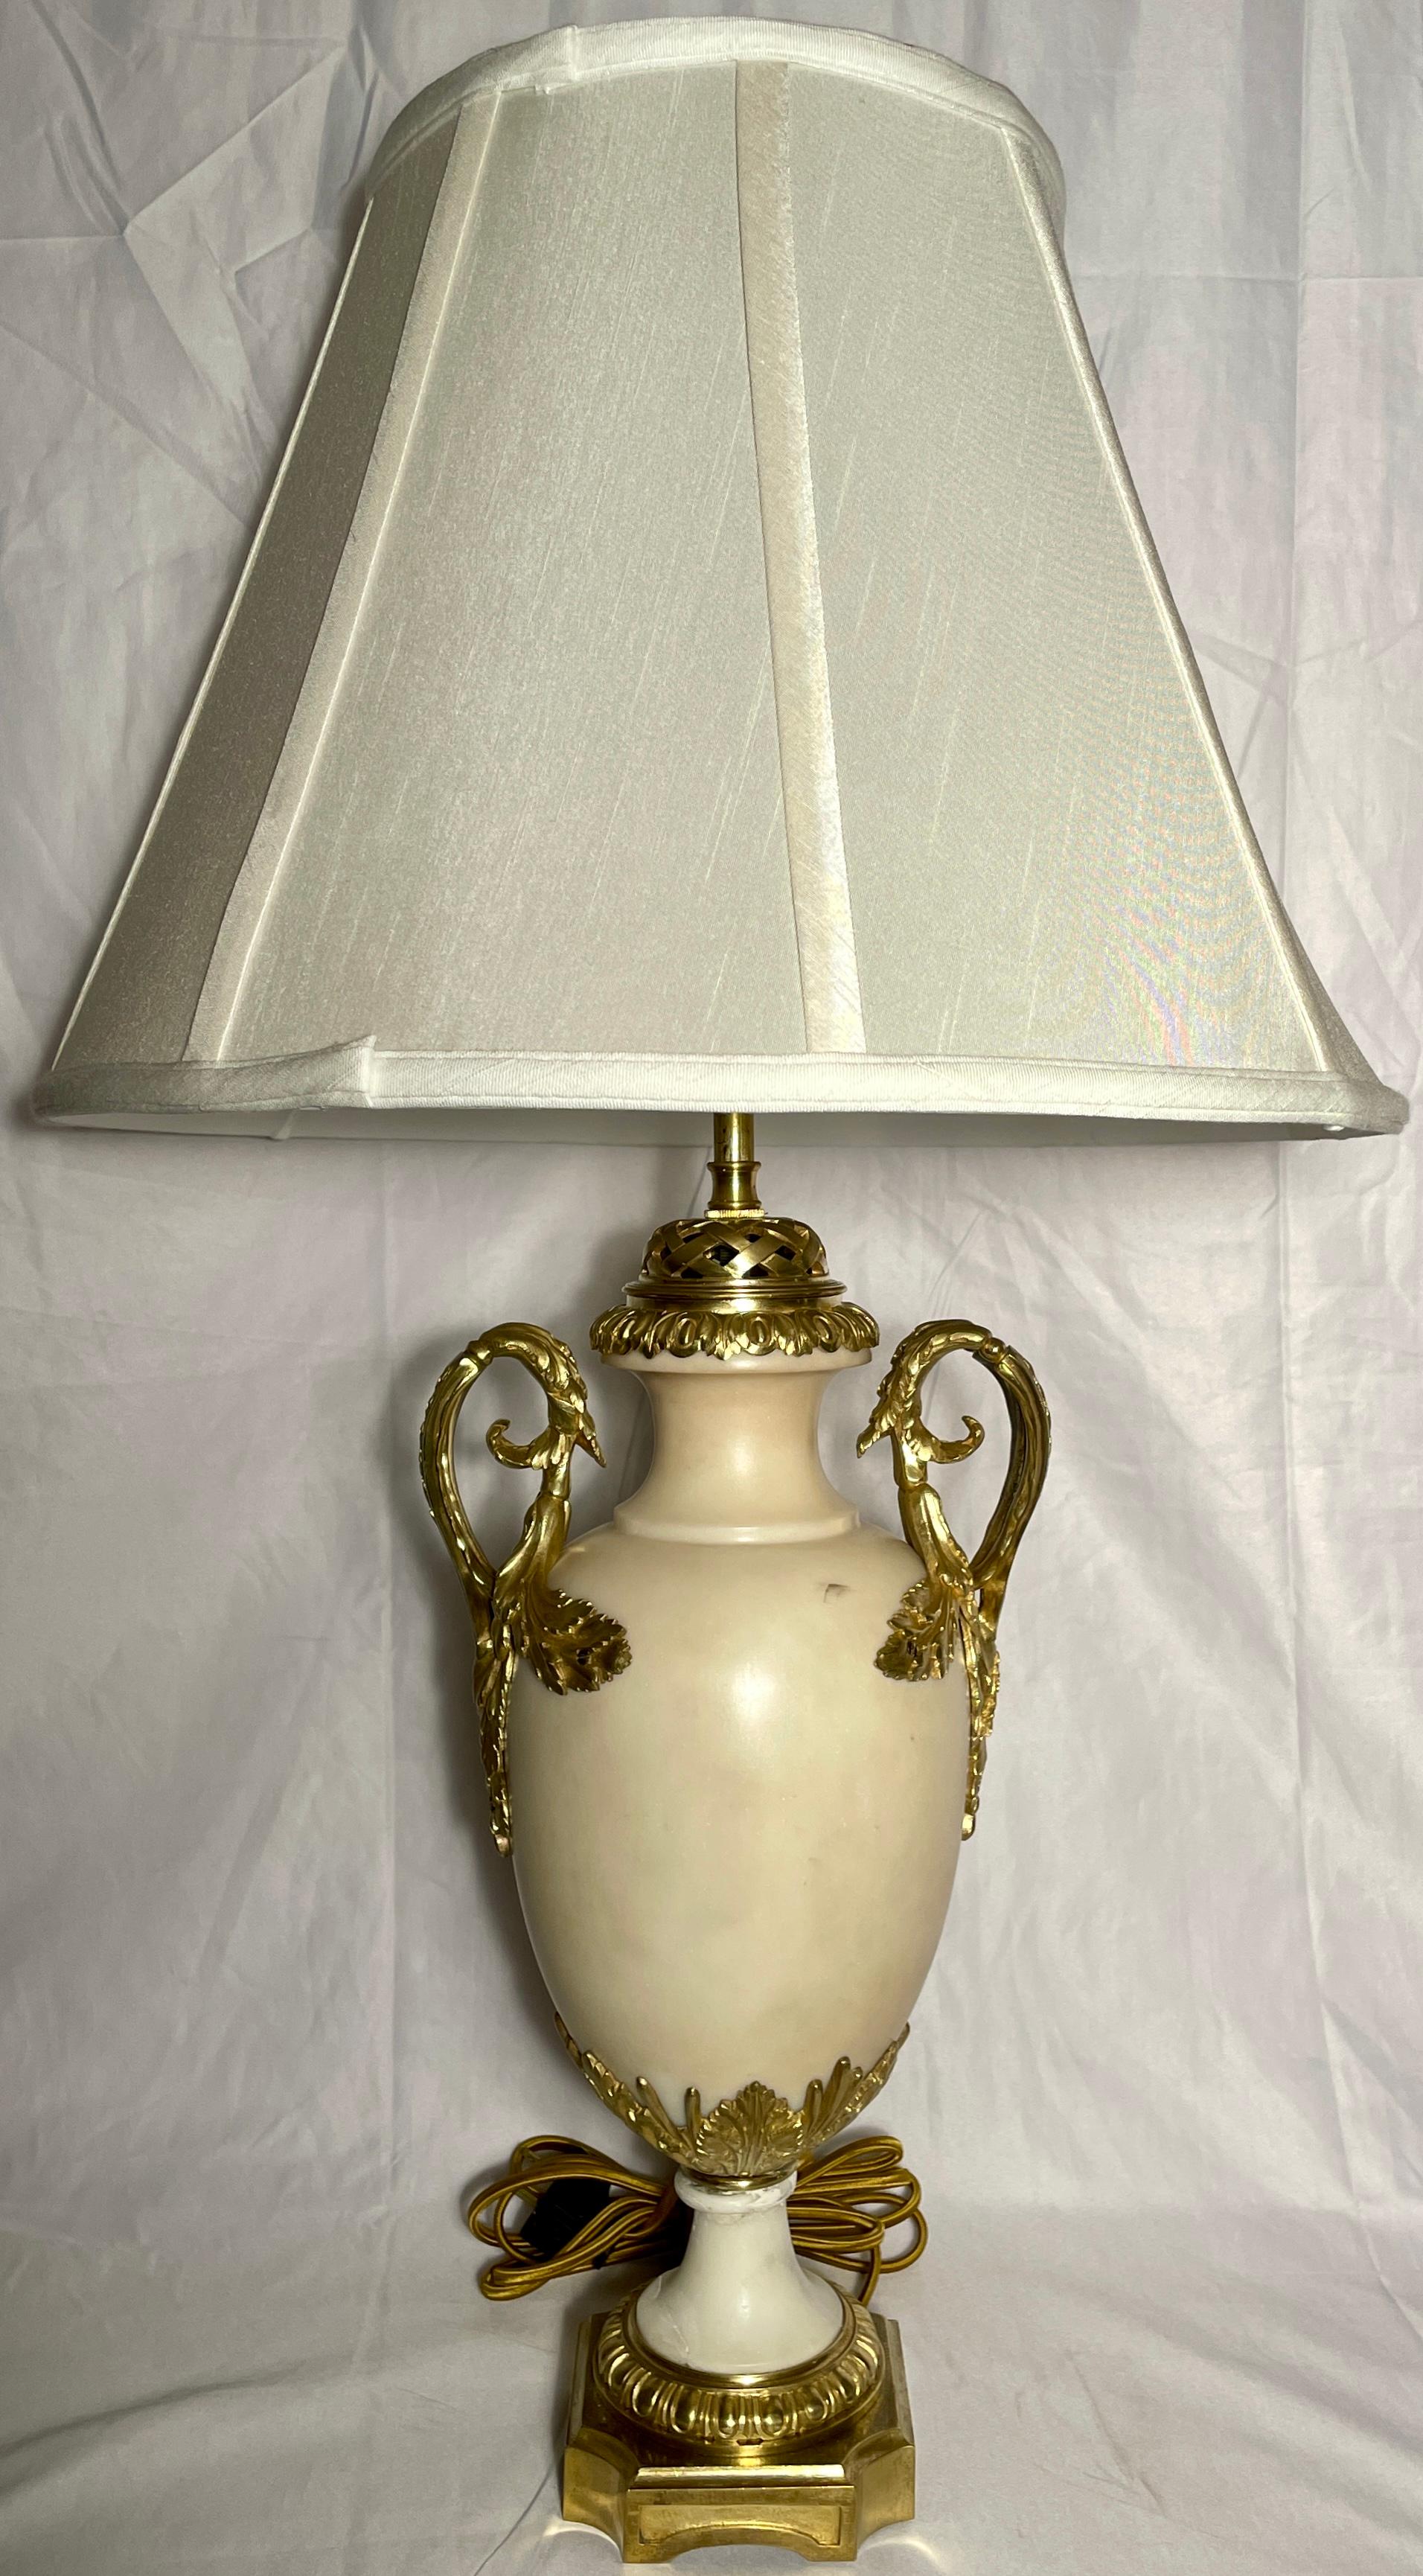 Pair antique French gold bronze mounted Carrara marble lamps, Circa 1890's.